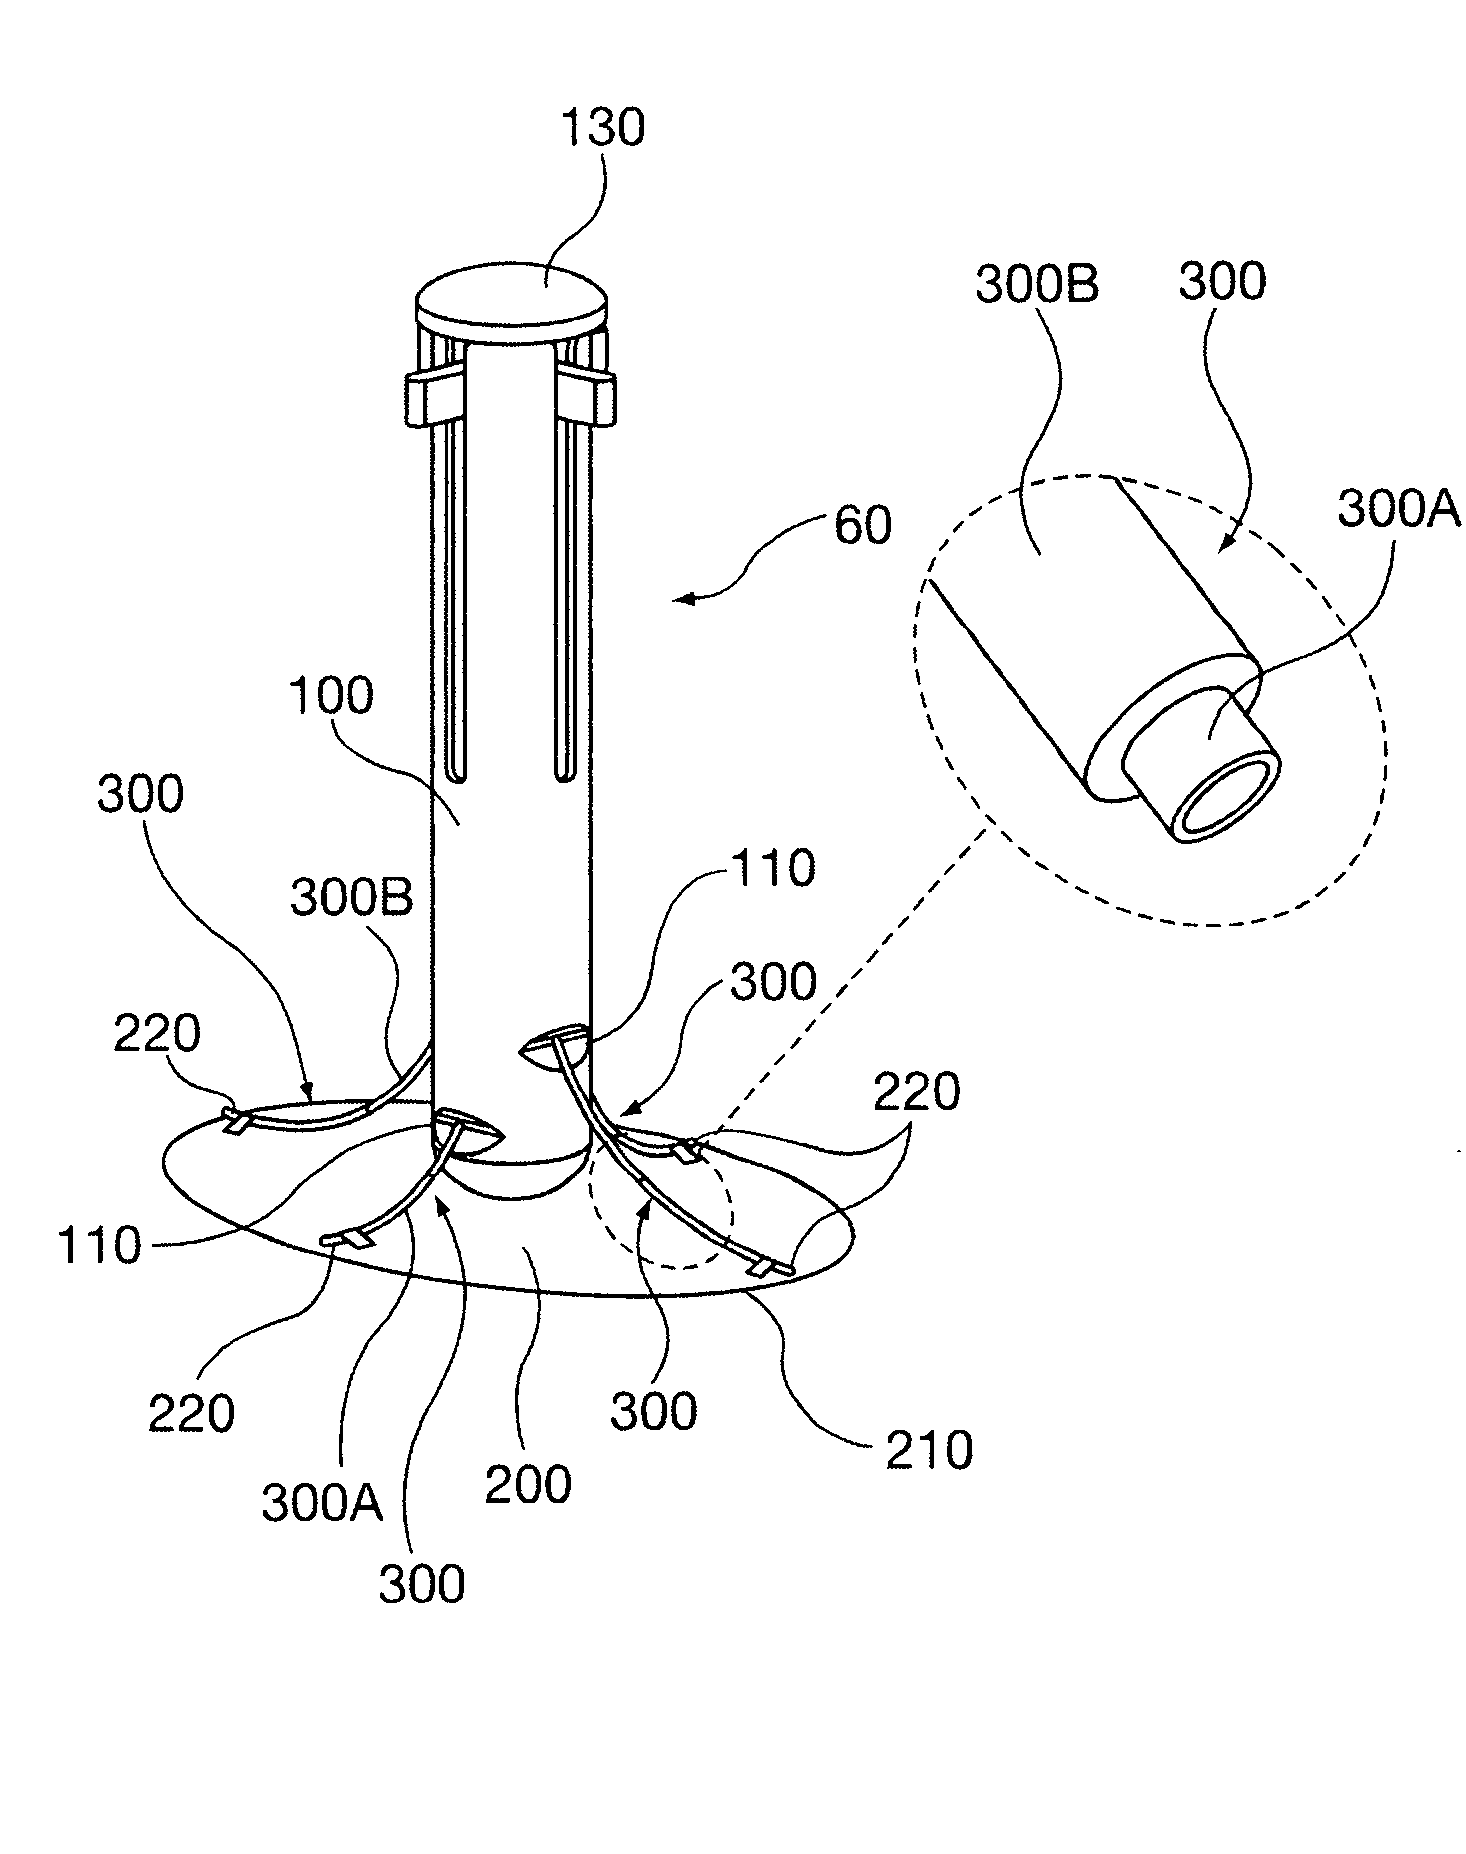 Method and apparatus for minimally invasive delivery, tensioned deployment and fixation of secondary material prosthetic devices in patient body tissue, including hernia repair within the patient's herniation site